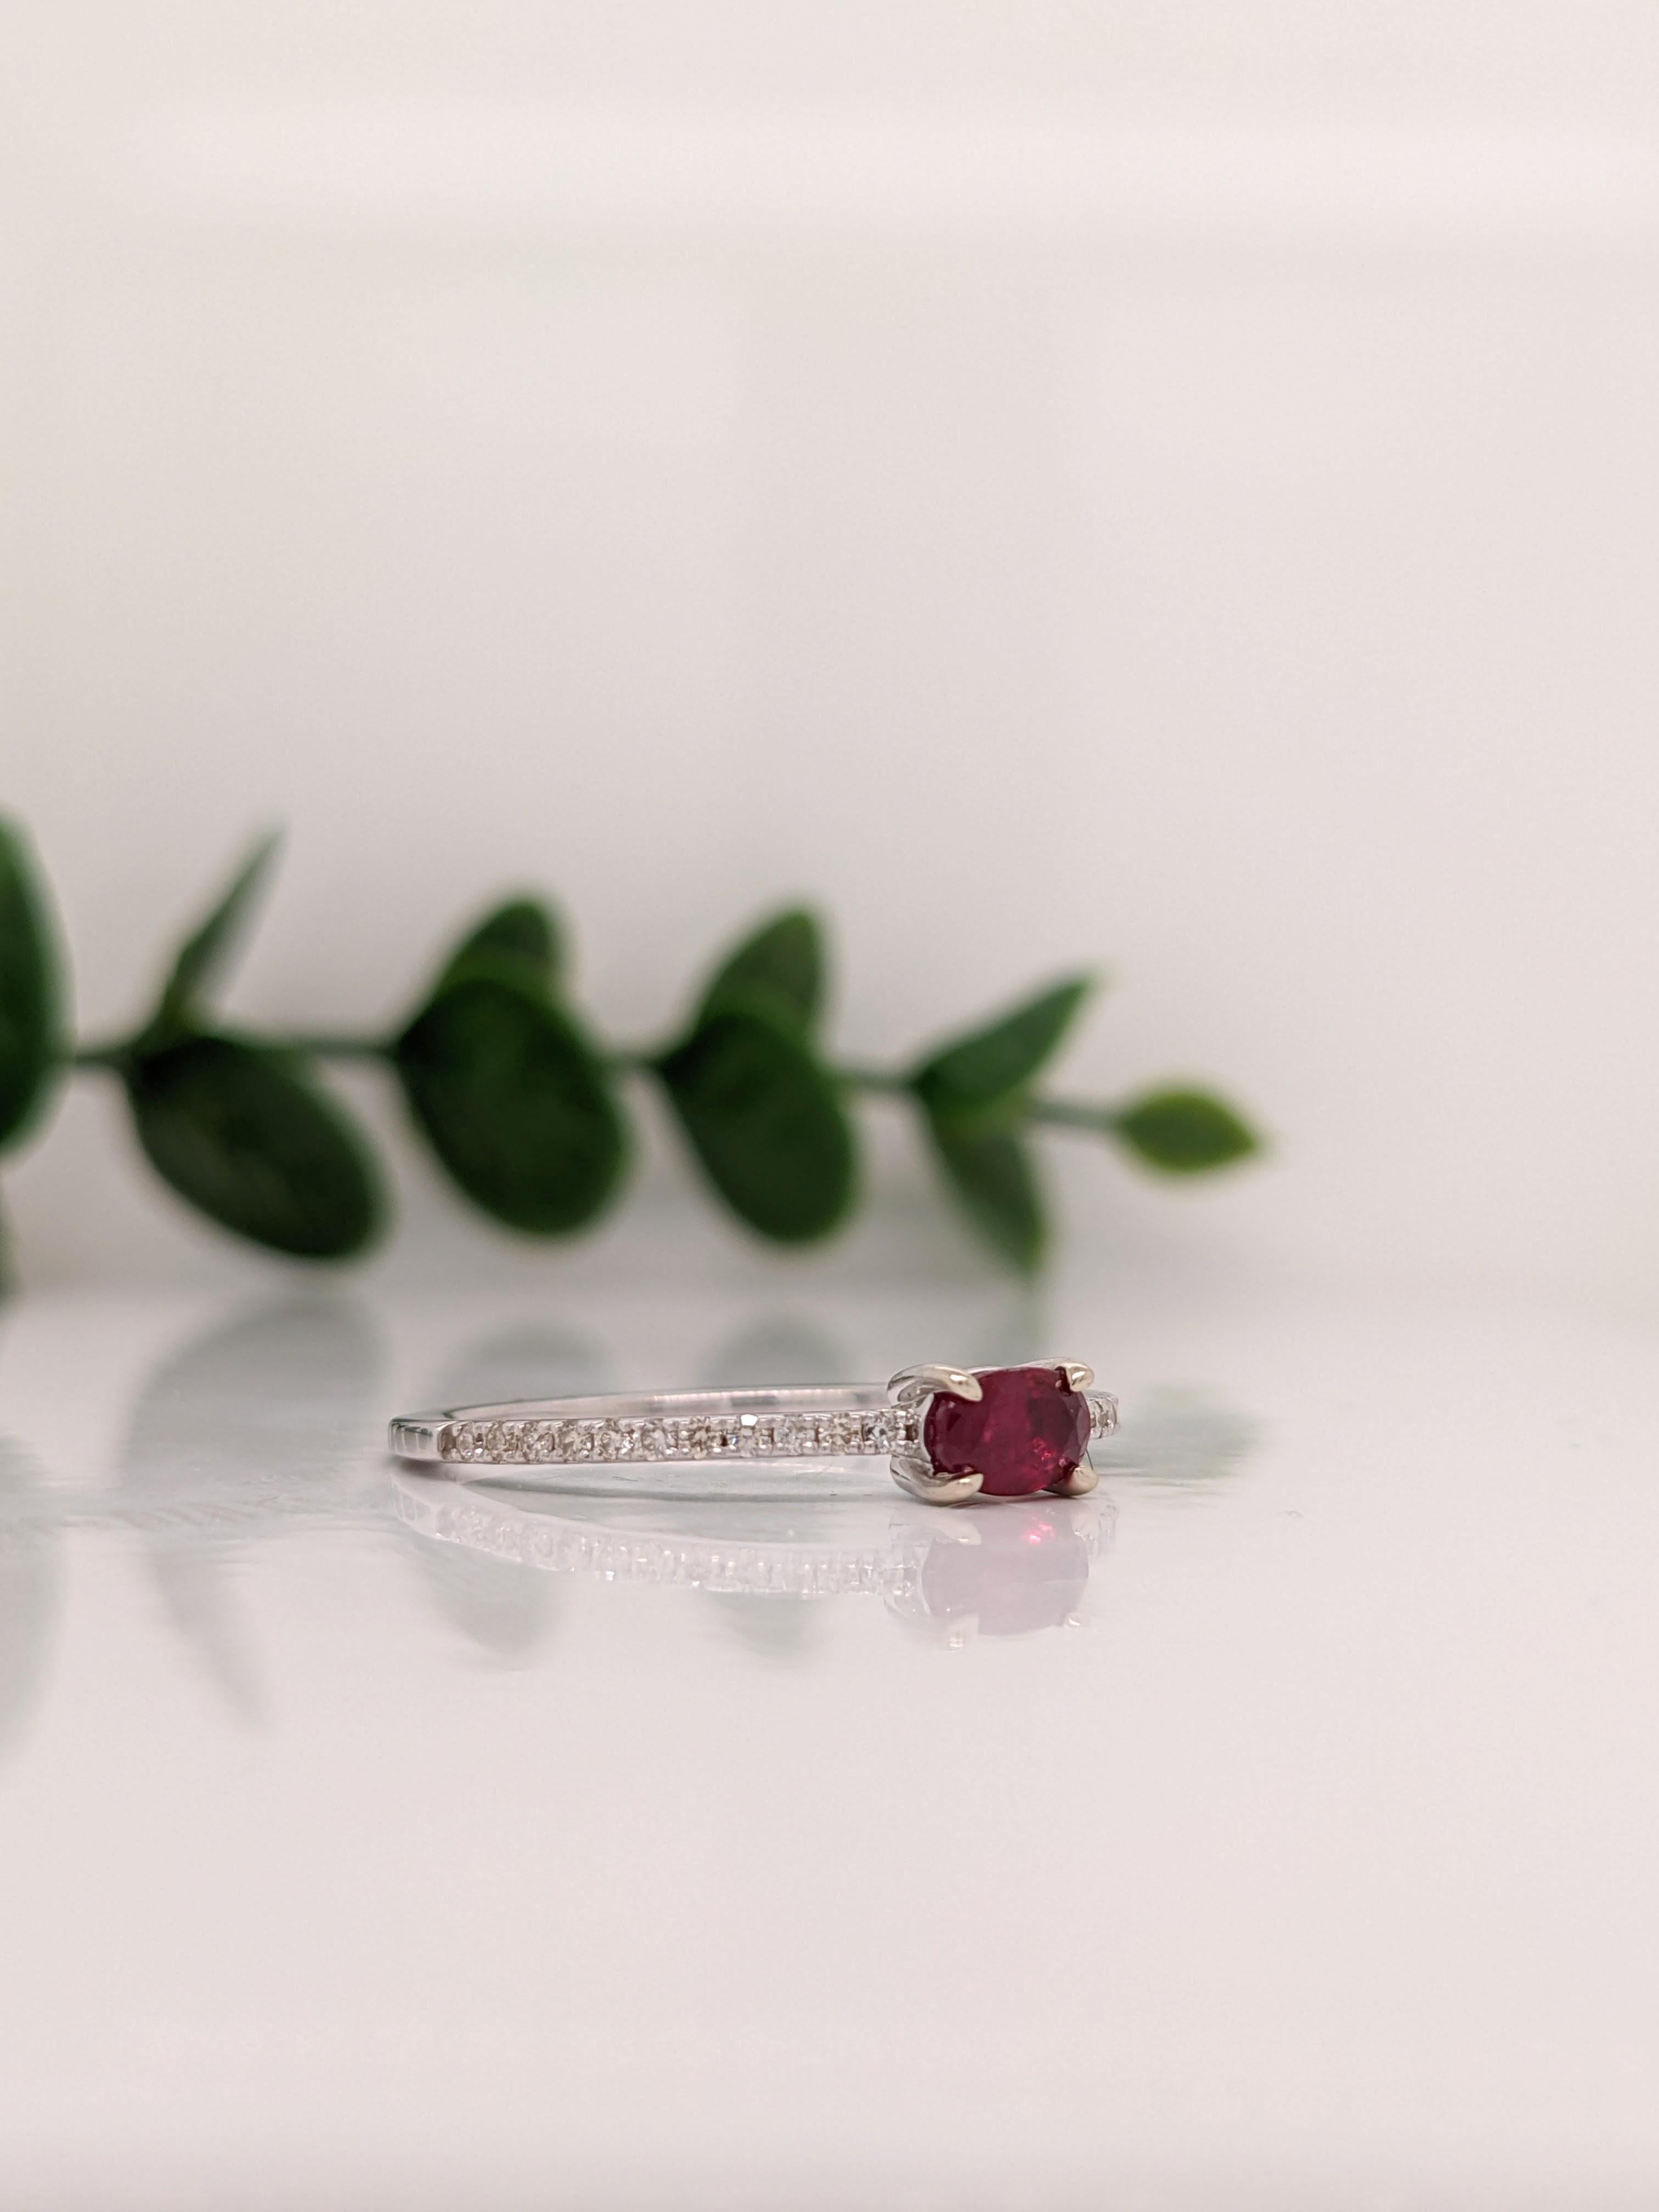 This beautiful ring features a sparkling east west prong set red ruby in 14k white gold with natural diamond accents. A delicate ring design perfect for an eye catching engagement or anniversary. This ring also makes a beautiful birthstone ring for